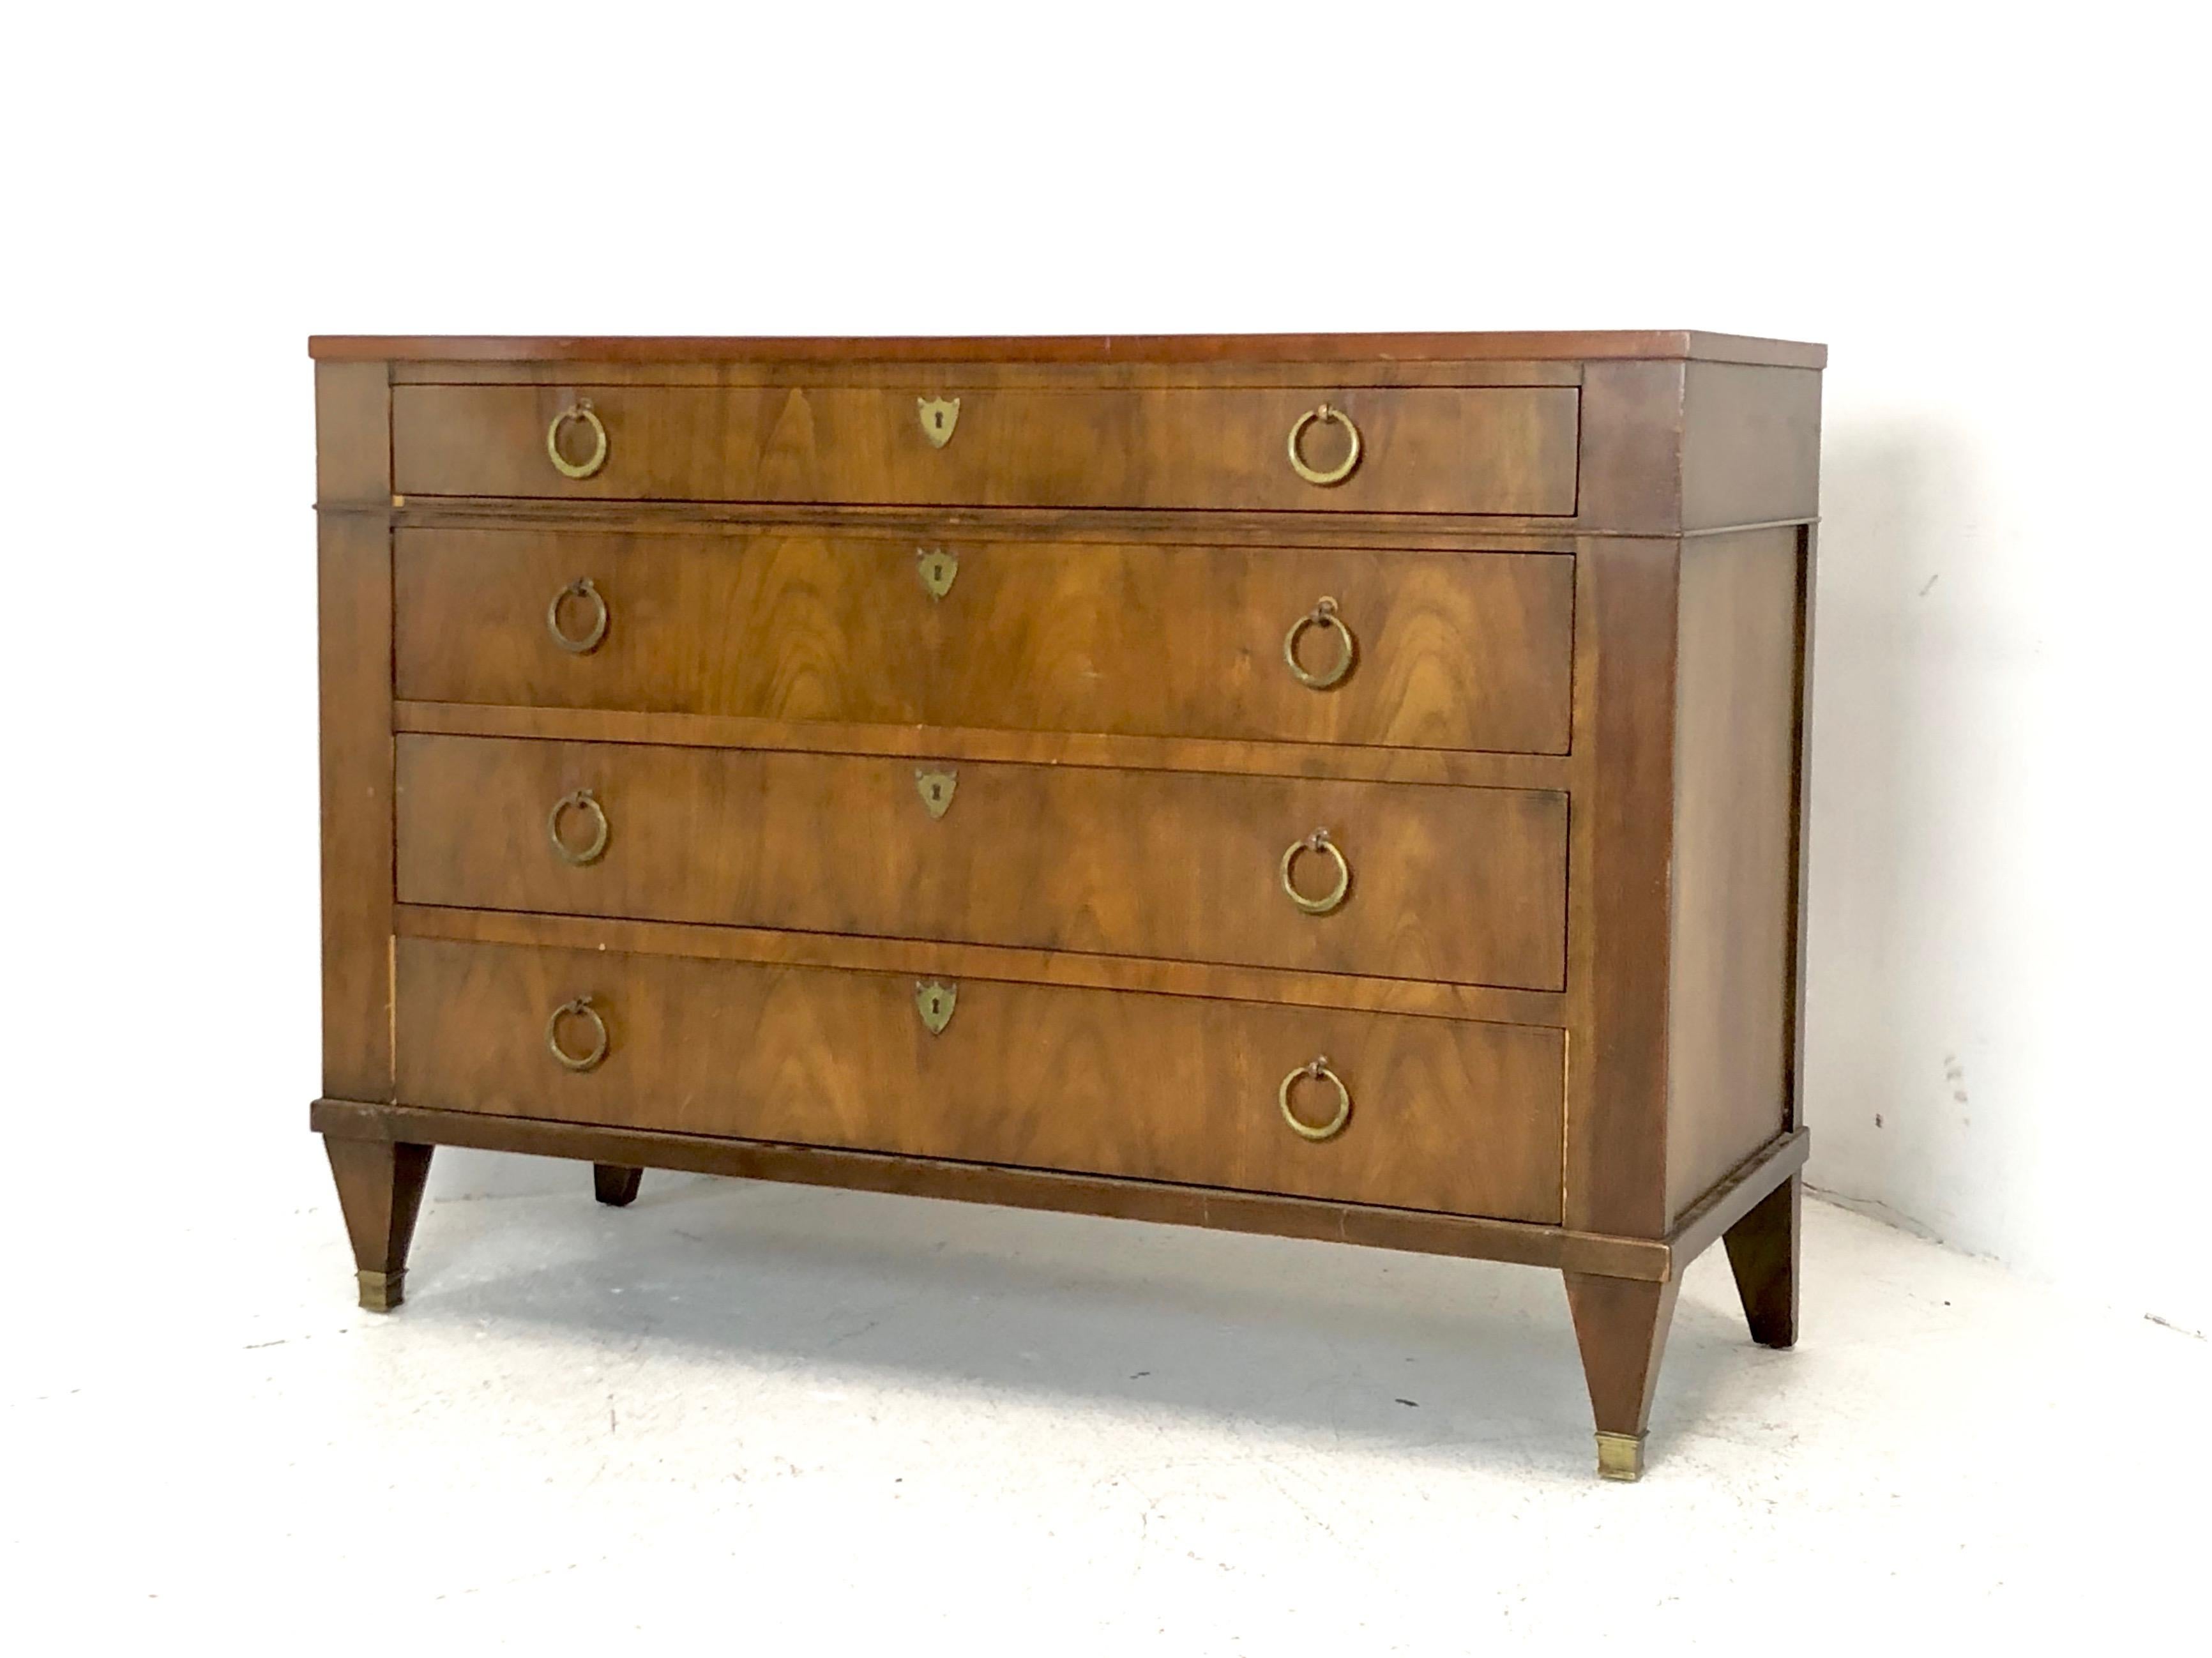 Midcentury dresser by Baker. Dresser is in good vintage condition and needs refinishing.
dimensions: 47 W x 18.5 D x 33.5 T.